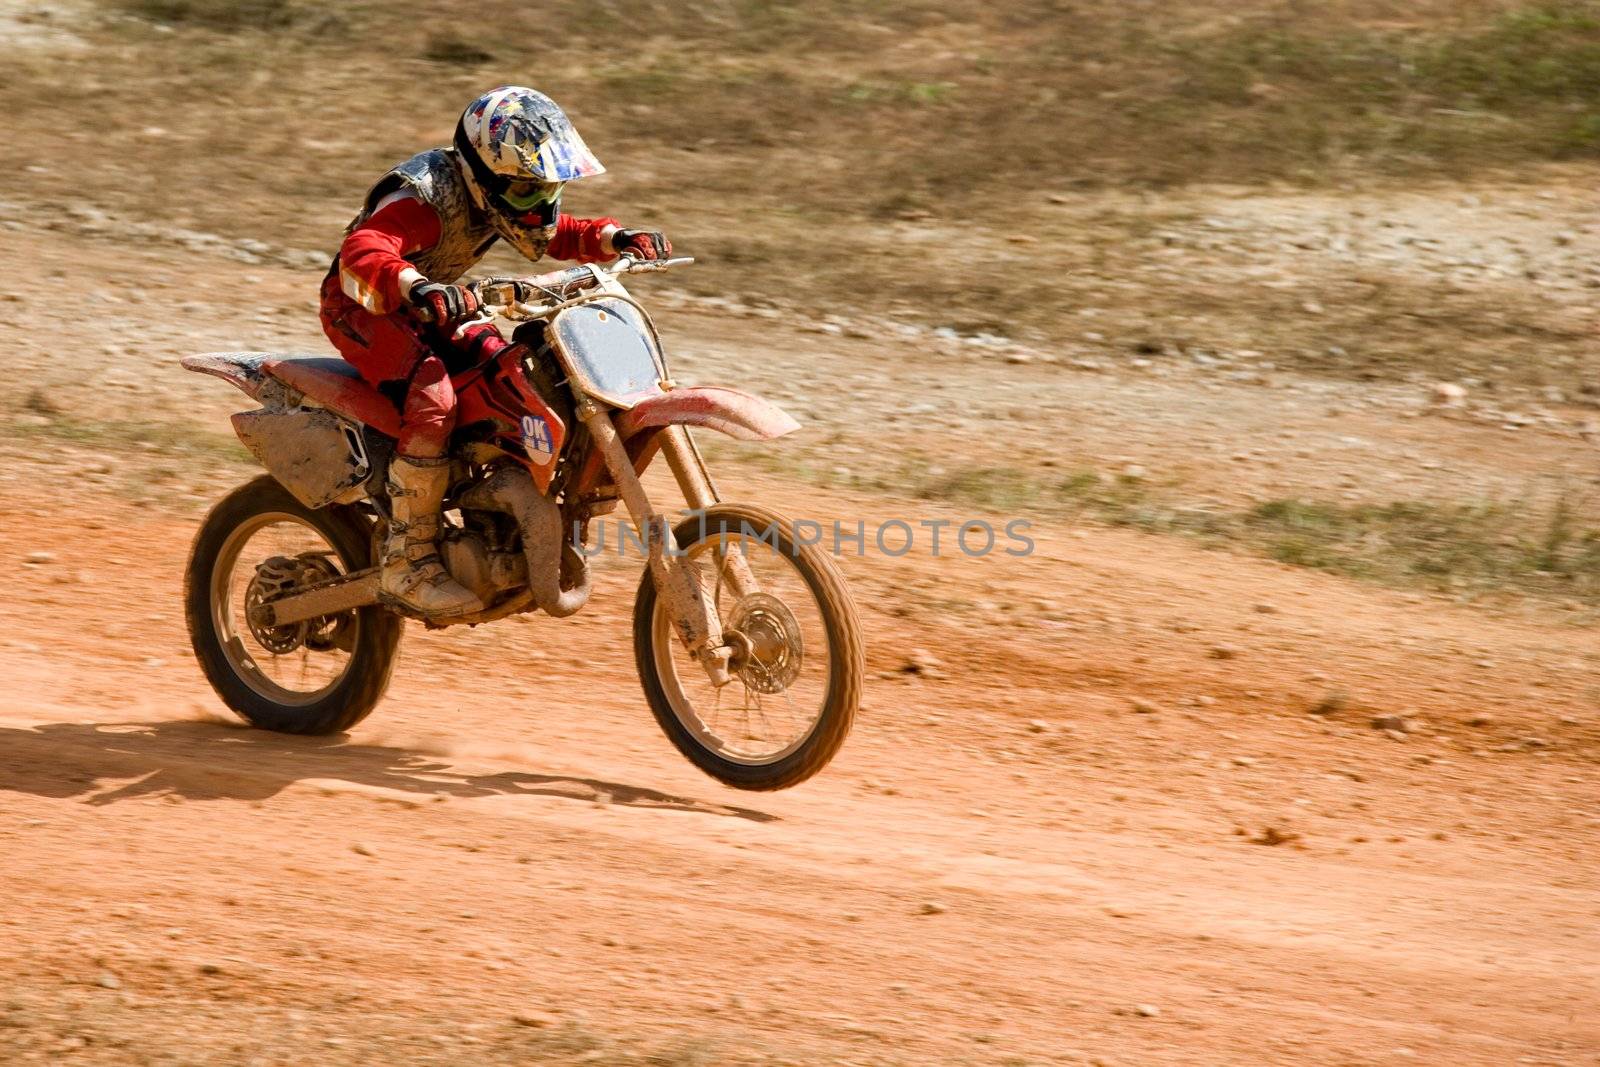 Image of a motocross participant in action.